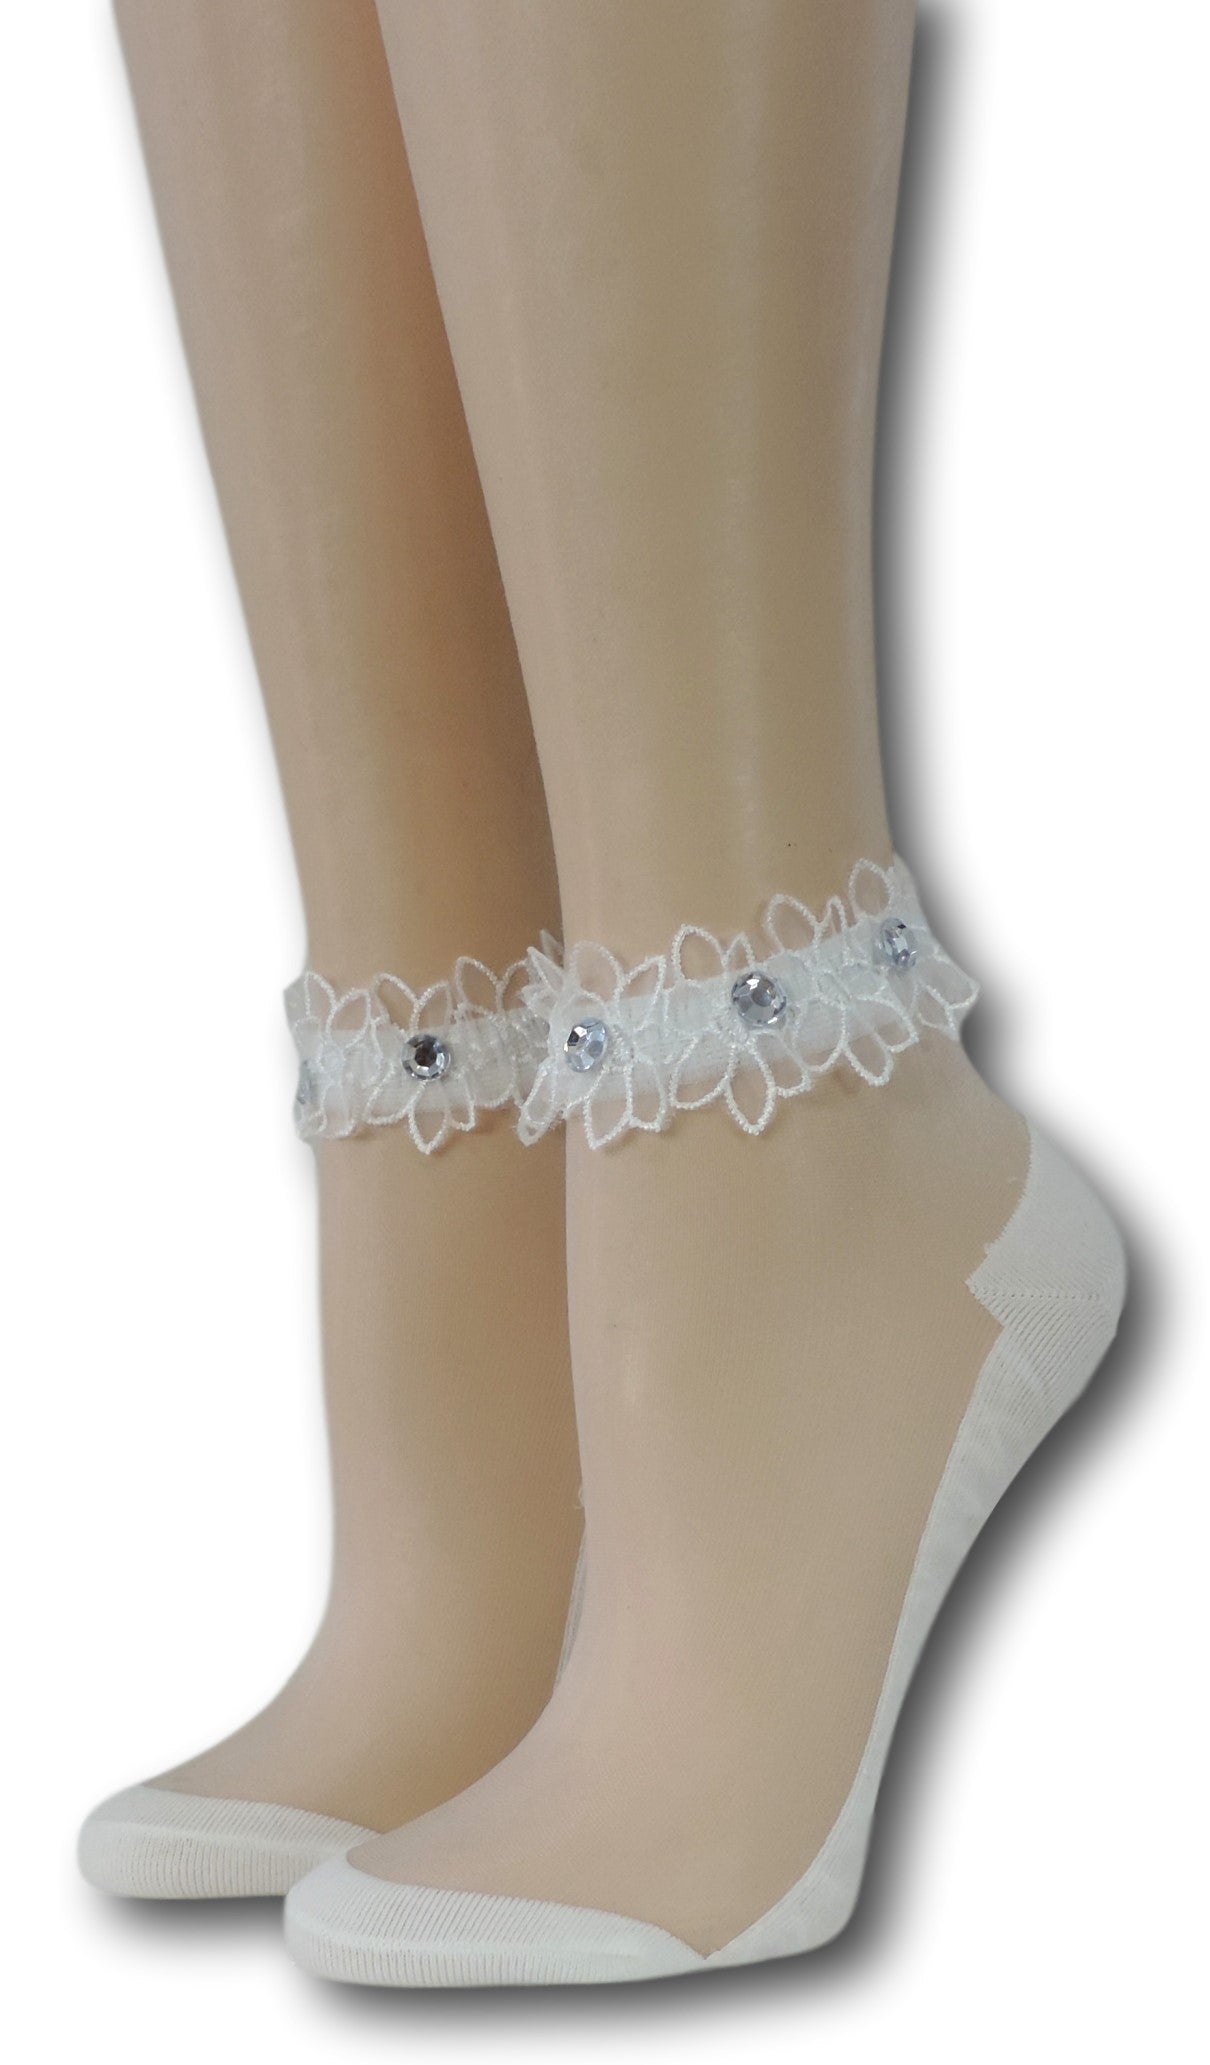 Bright White Ankle Sheer Socks with beads